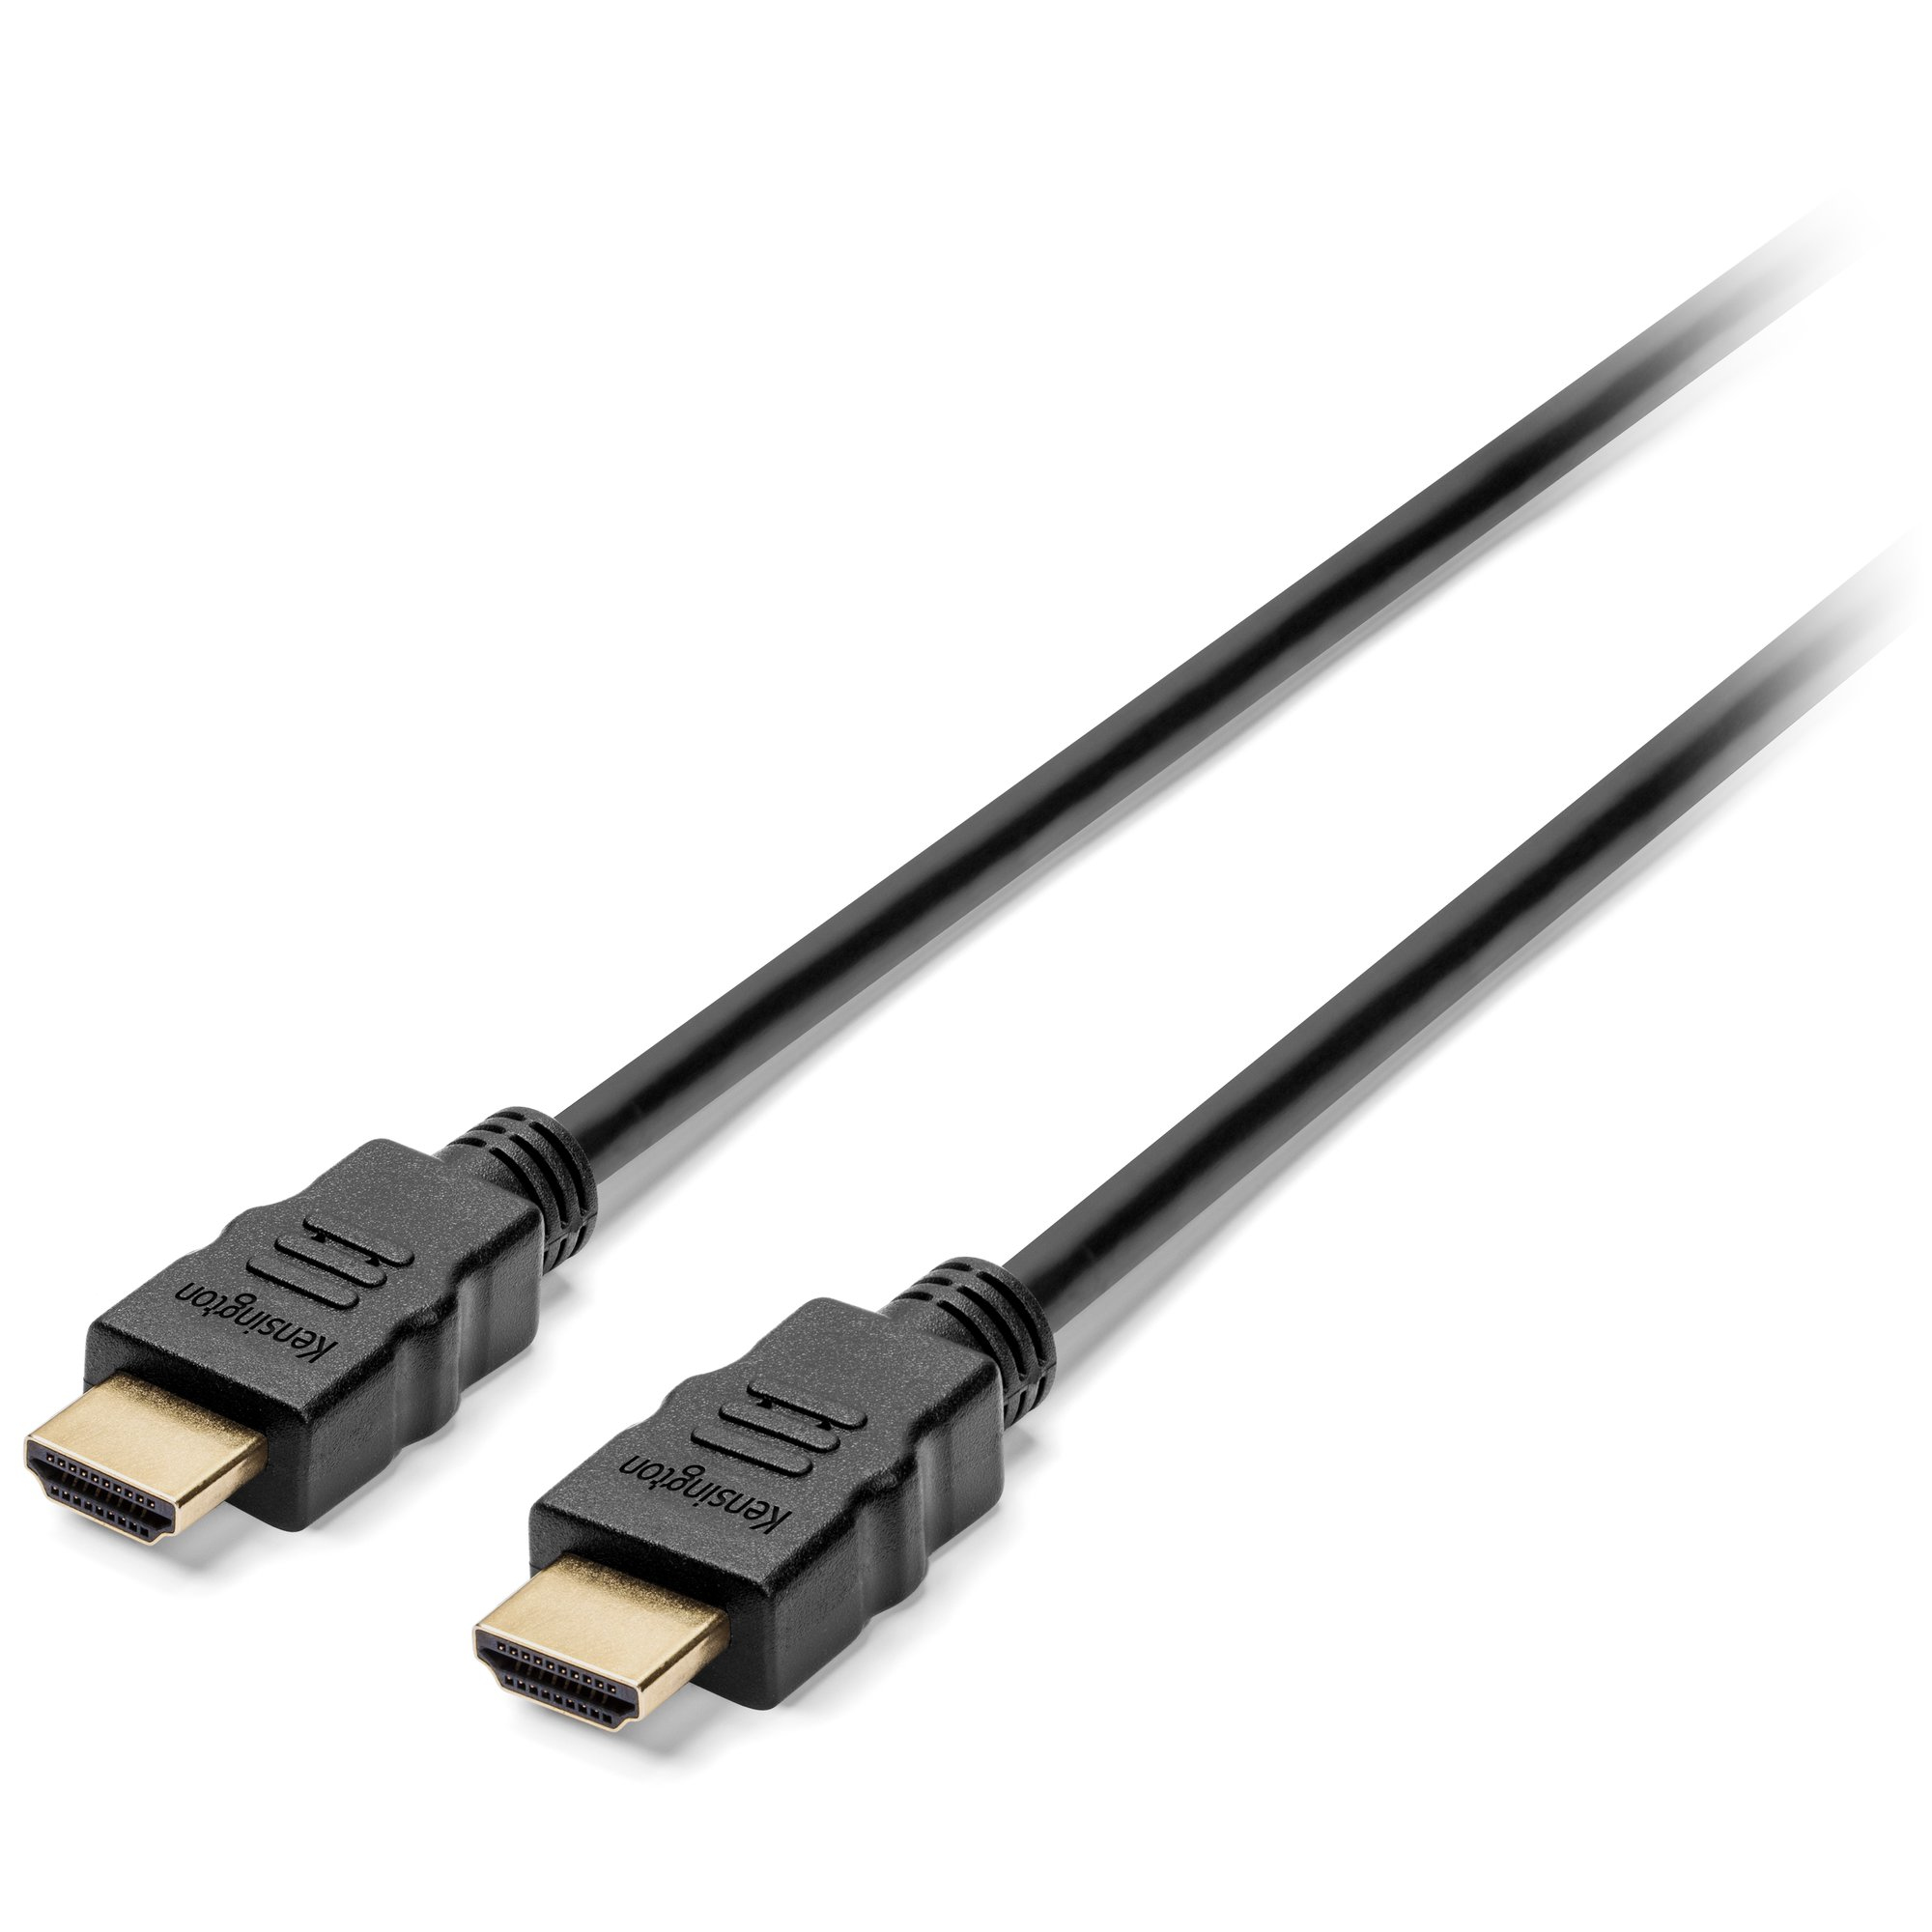 Kensington High Speed HDMI Cable with Ethernet, 1.8m (6ft) - K33020WW